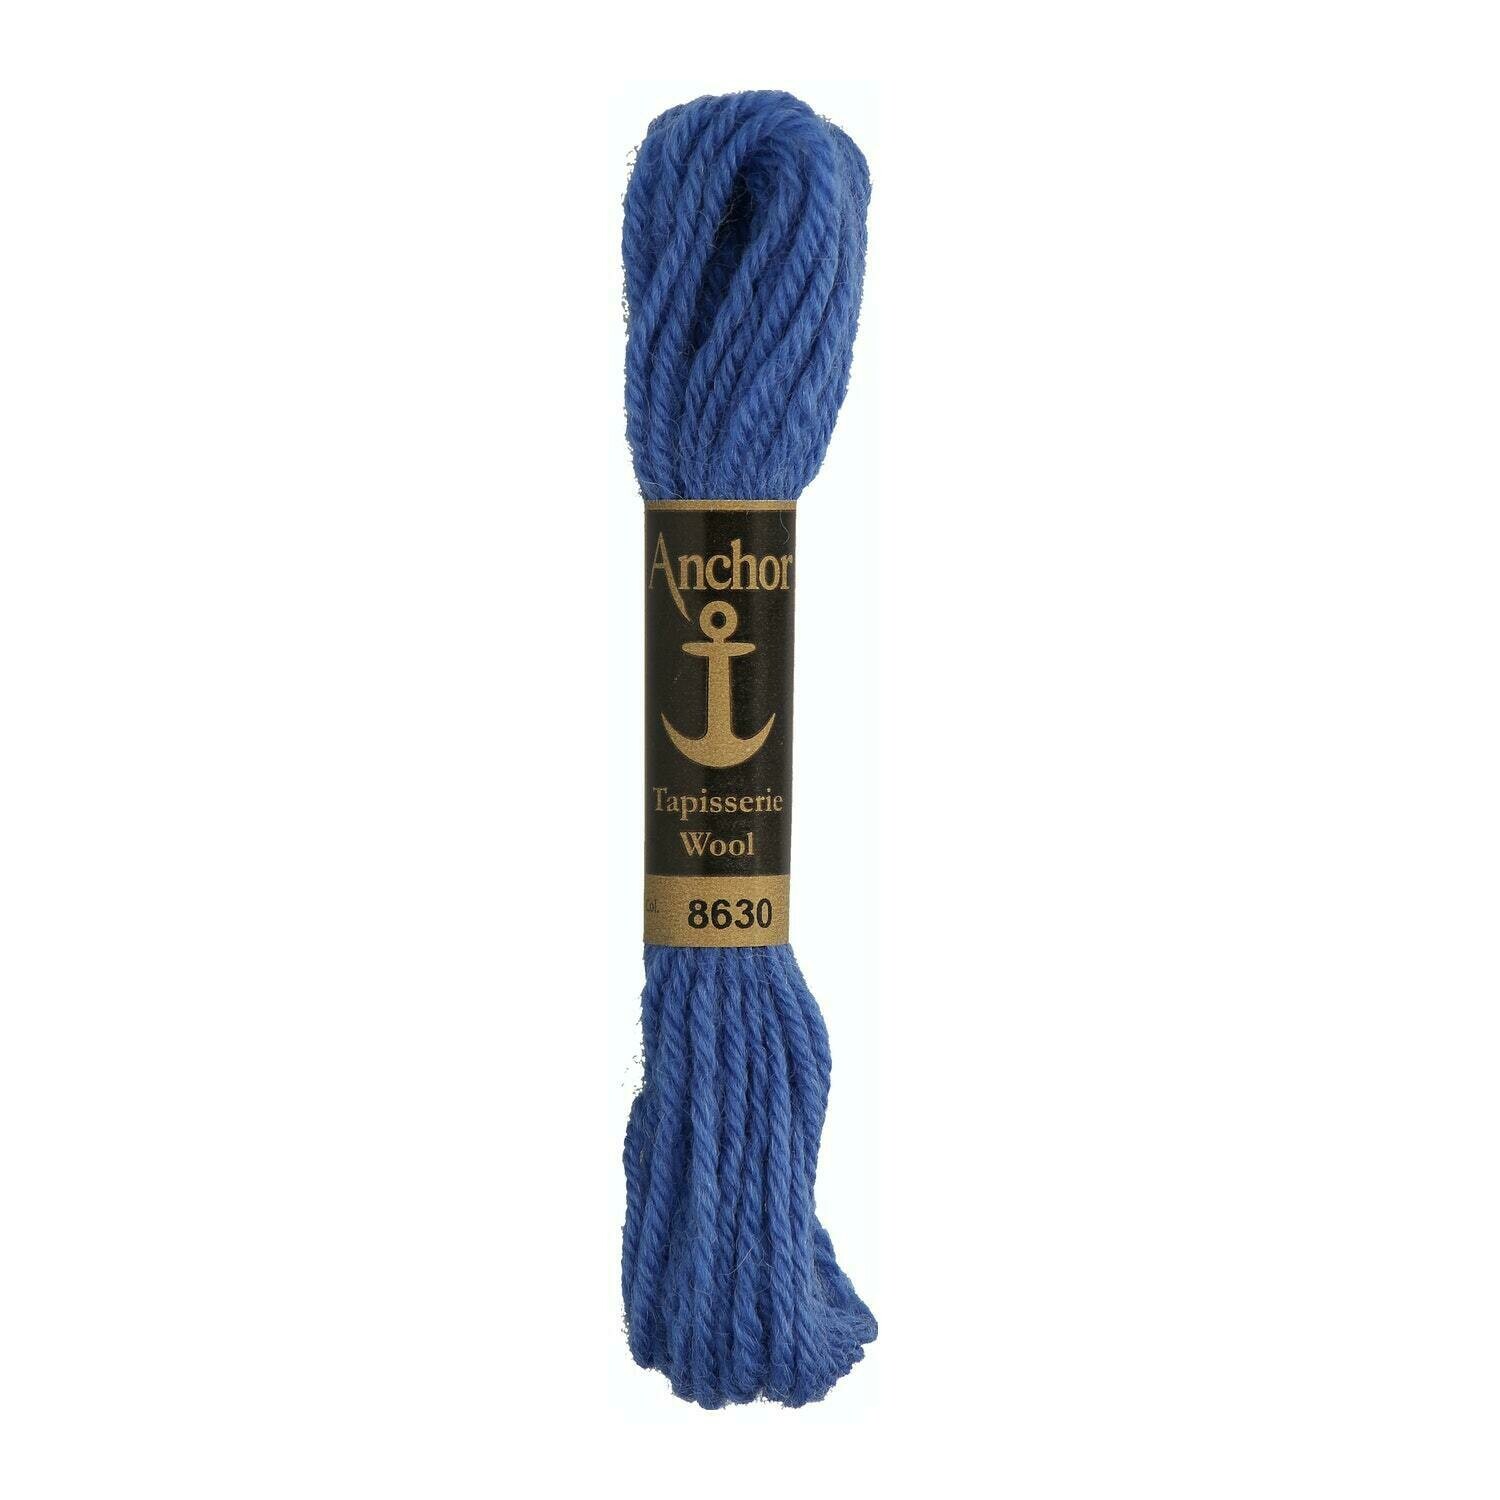 Anchor Tapisserie Wool #08630